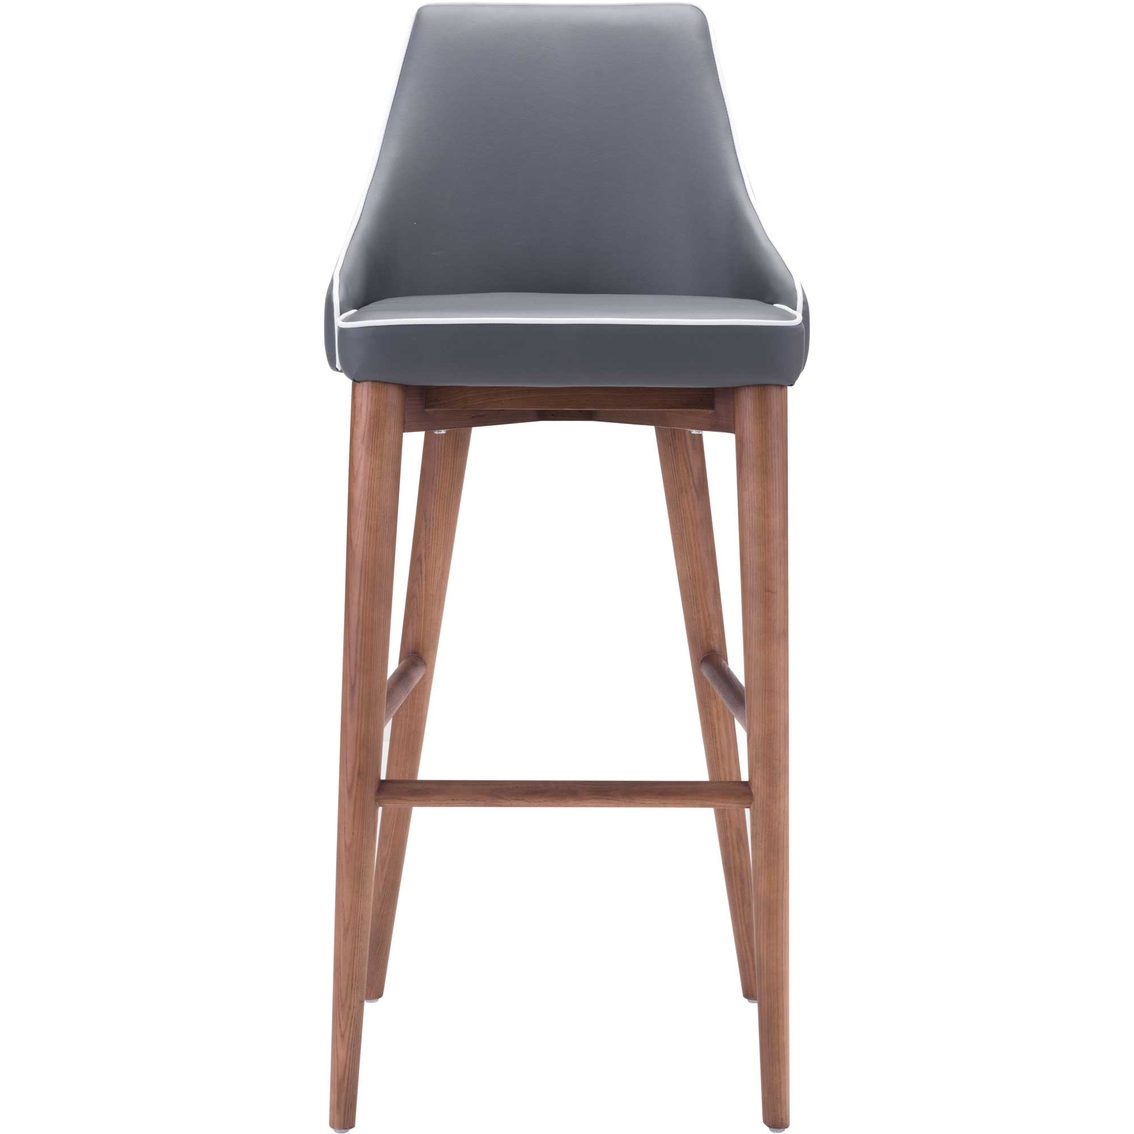 Zuo Moor Bar Chair - Image 3 of 8